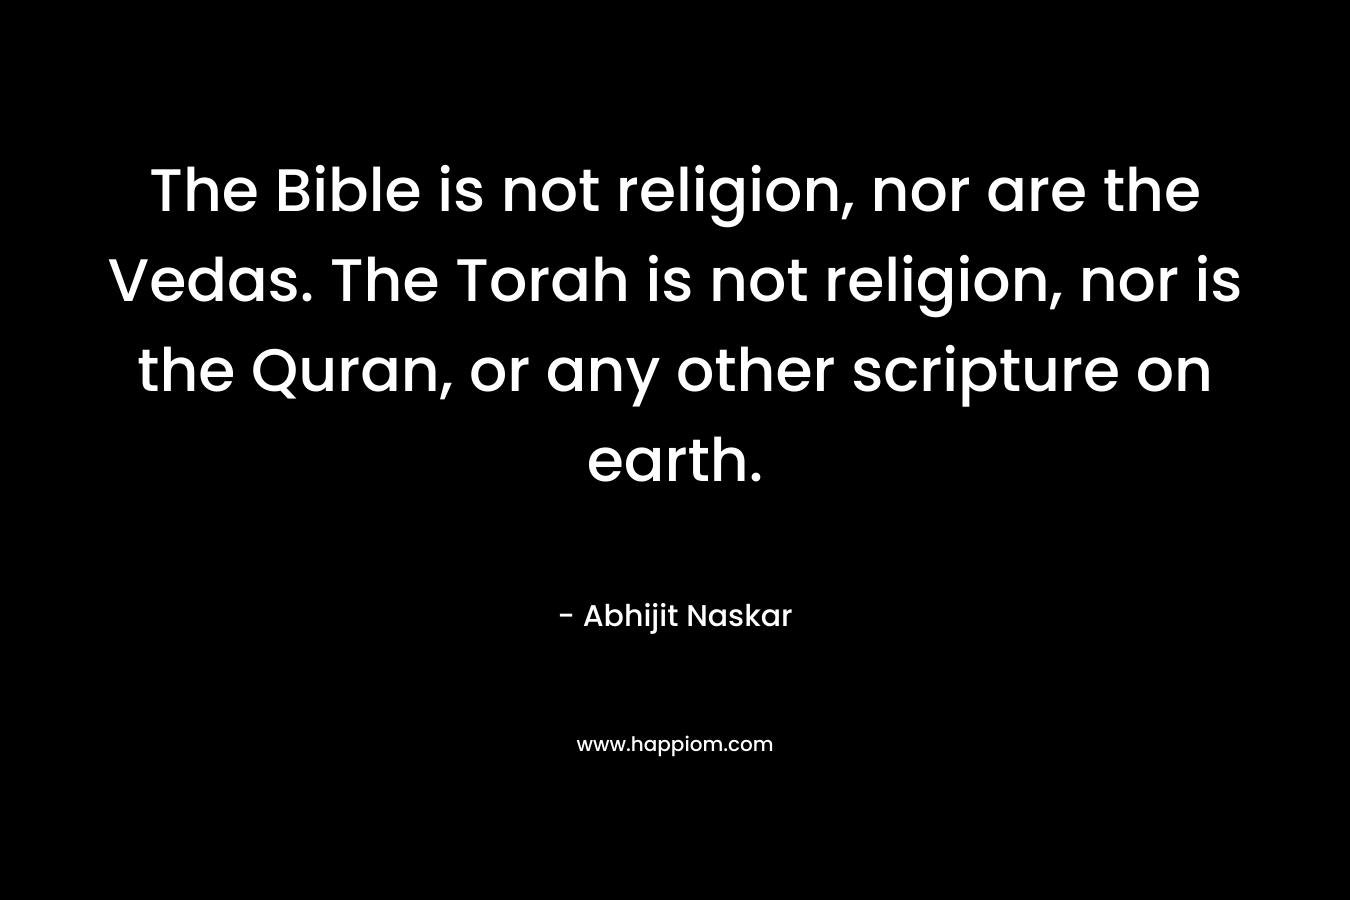 The Bible is not religion, nor are the Vedas. The Torah is not religion, nor is the Quran, or any other scripture on earth.